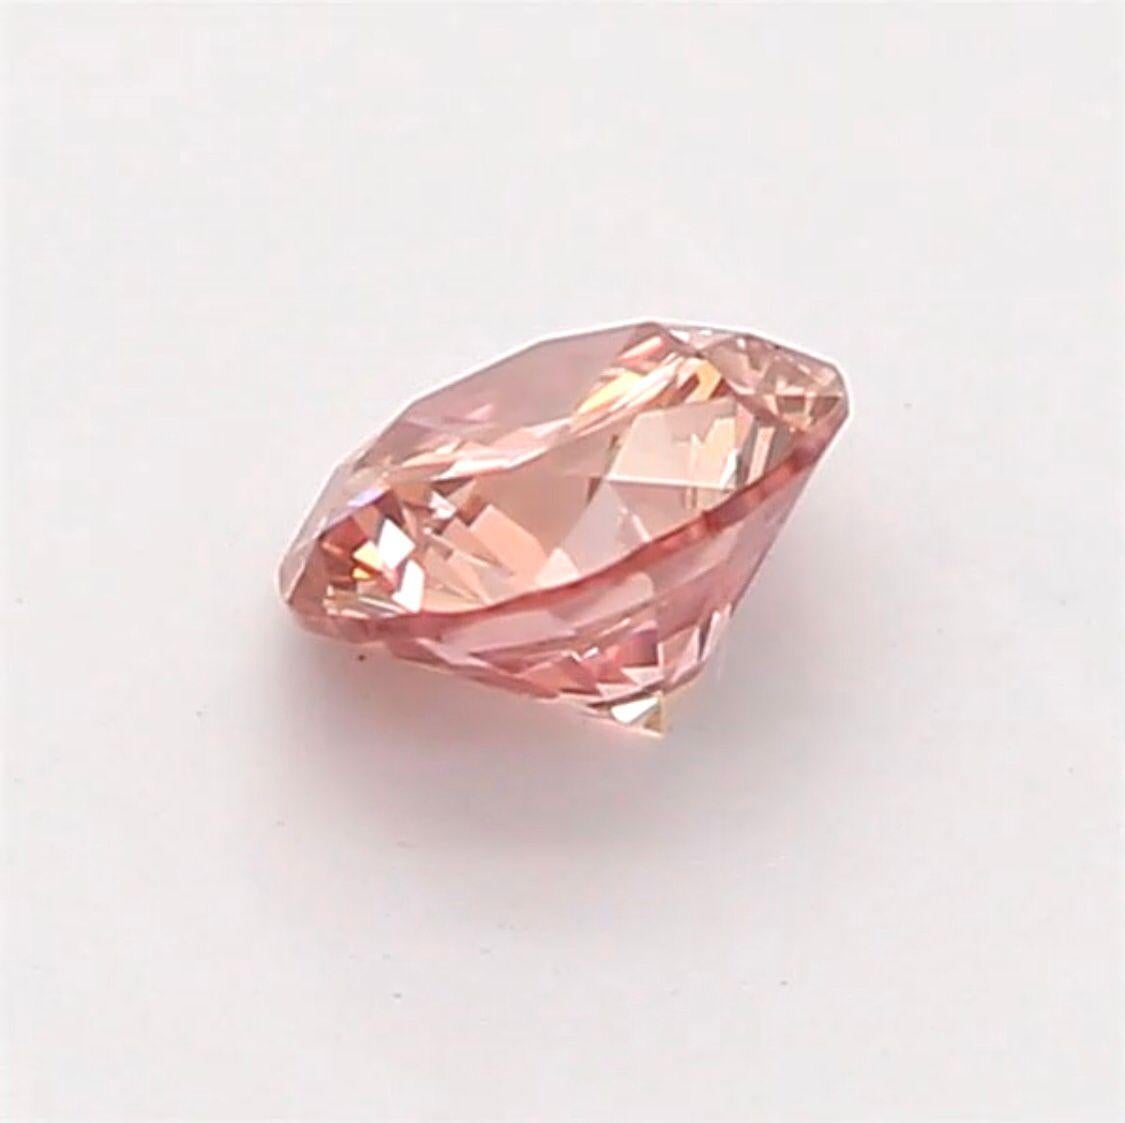 0.15 Carat Fancy Orangy Pink Round Shaped Diamond SI2 Clarity CGL Certified For Sale 1